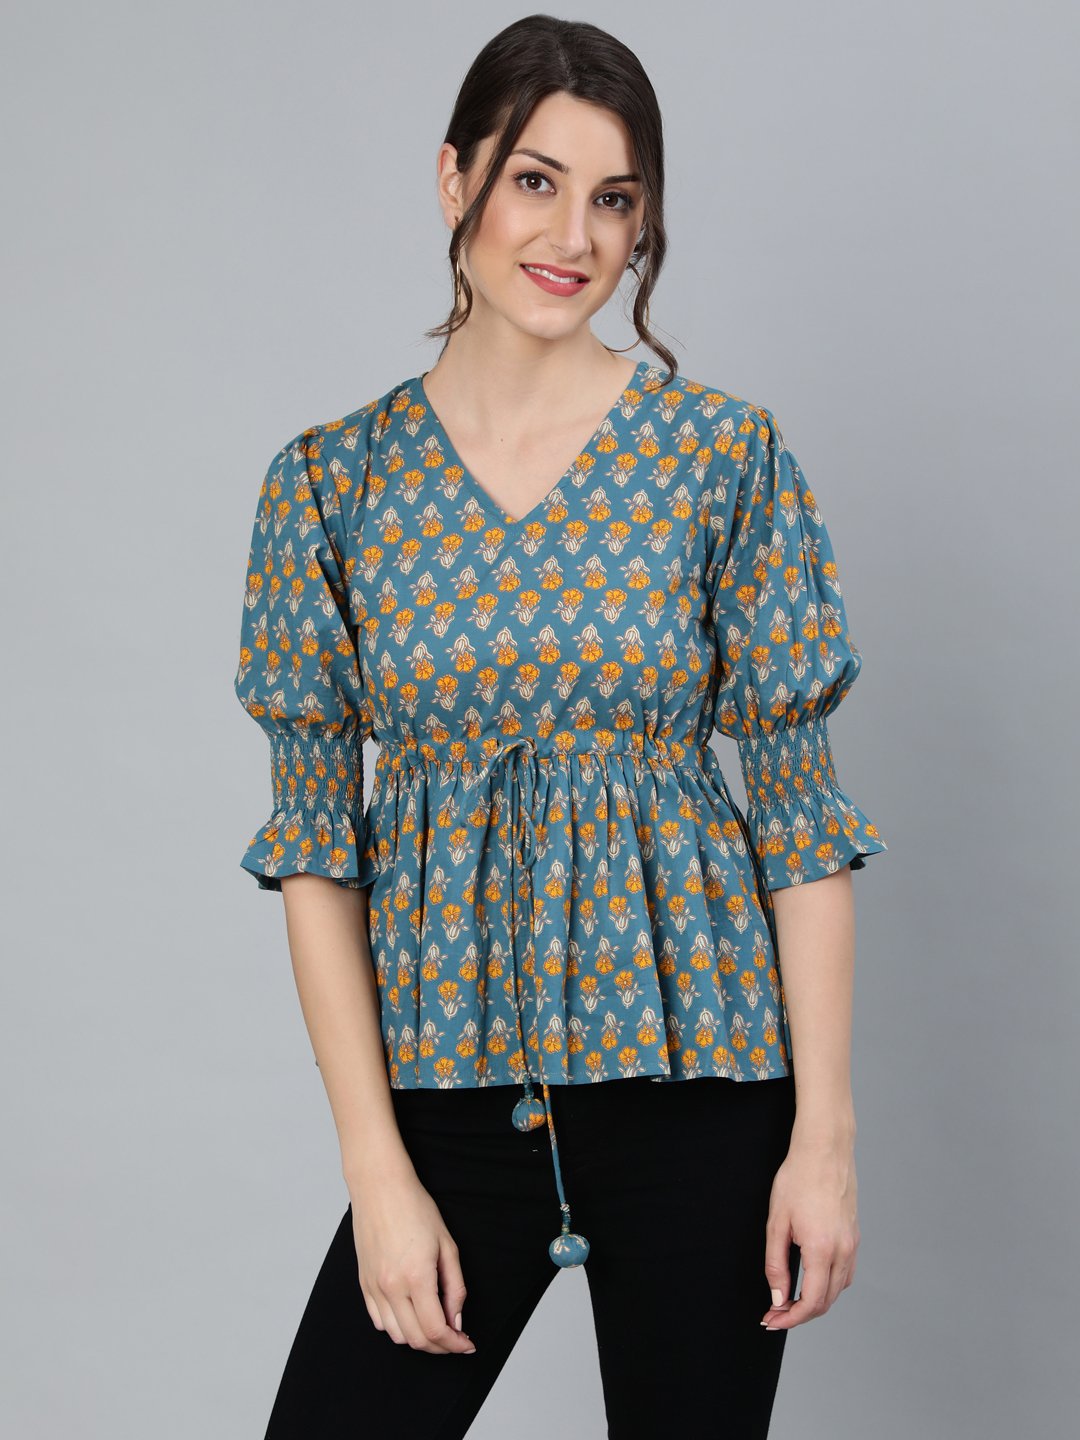 Women's Teal Blue & Yellow Printed Top With V Neck & Three Quarter Sleeves - Nayo Clothing